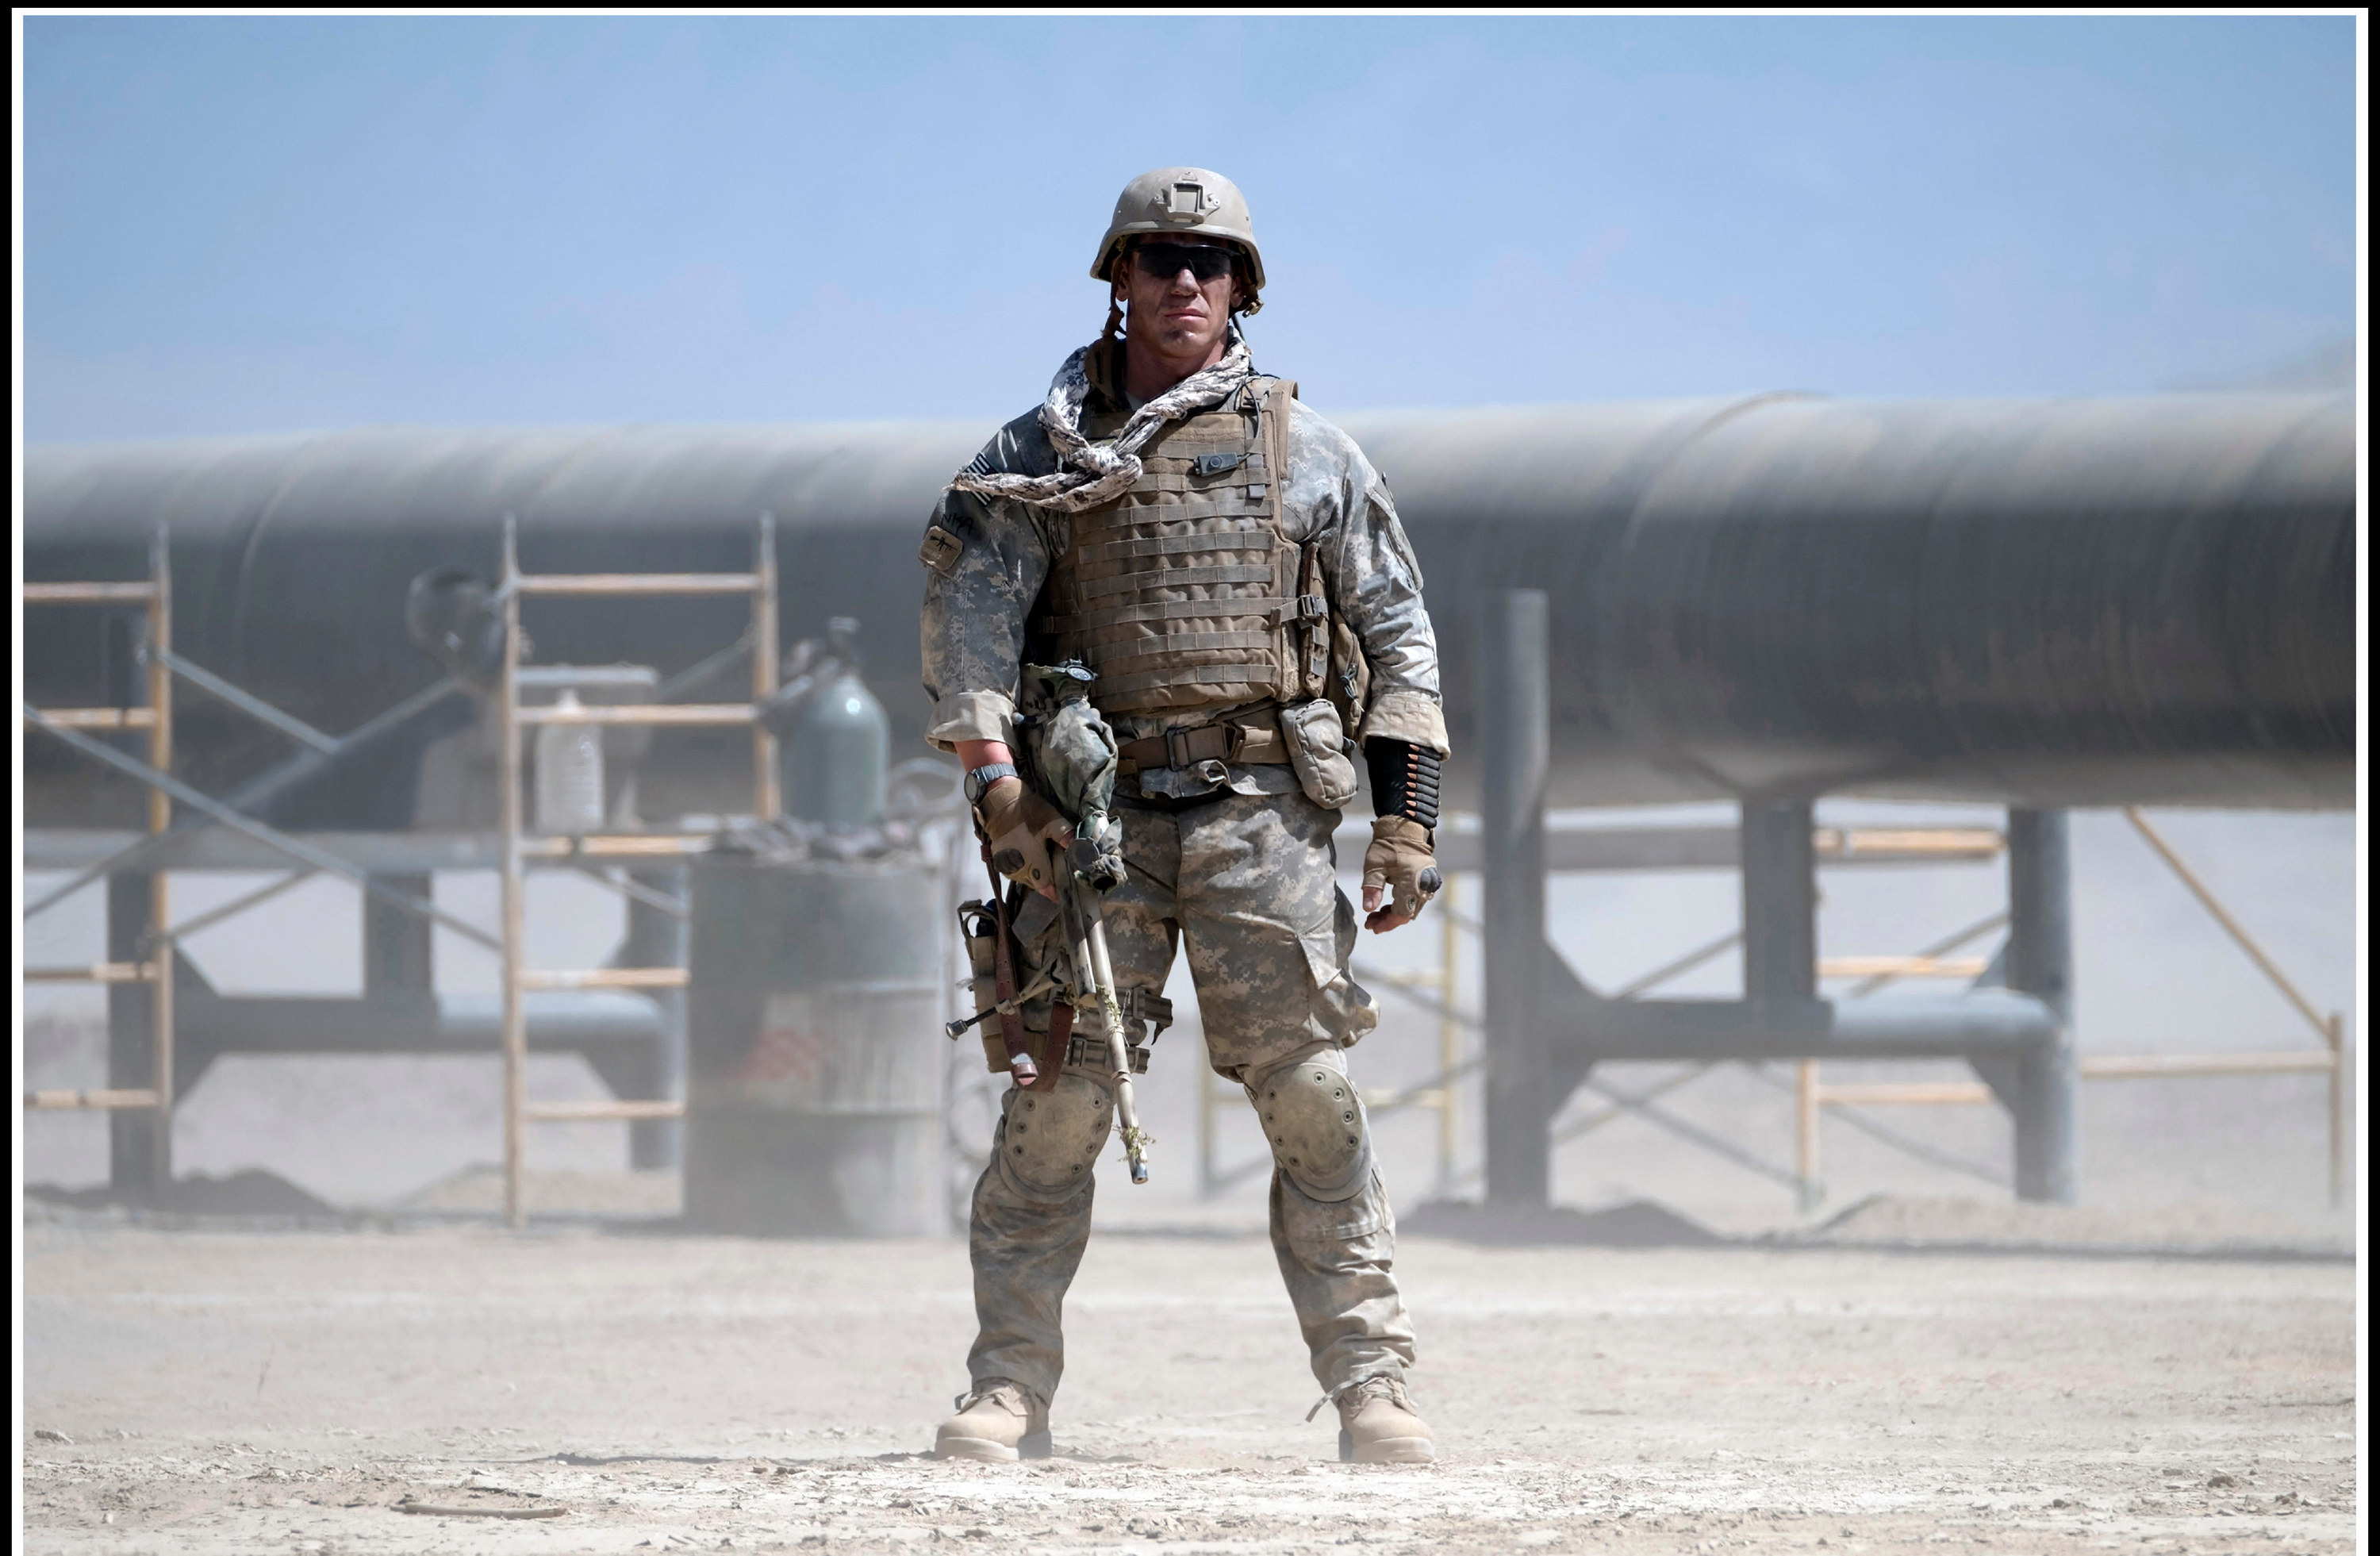 A large American soldier stands ready with gun-in-hand near an oil pipeline